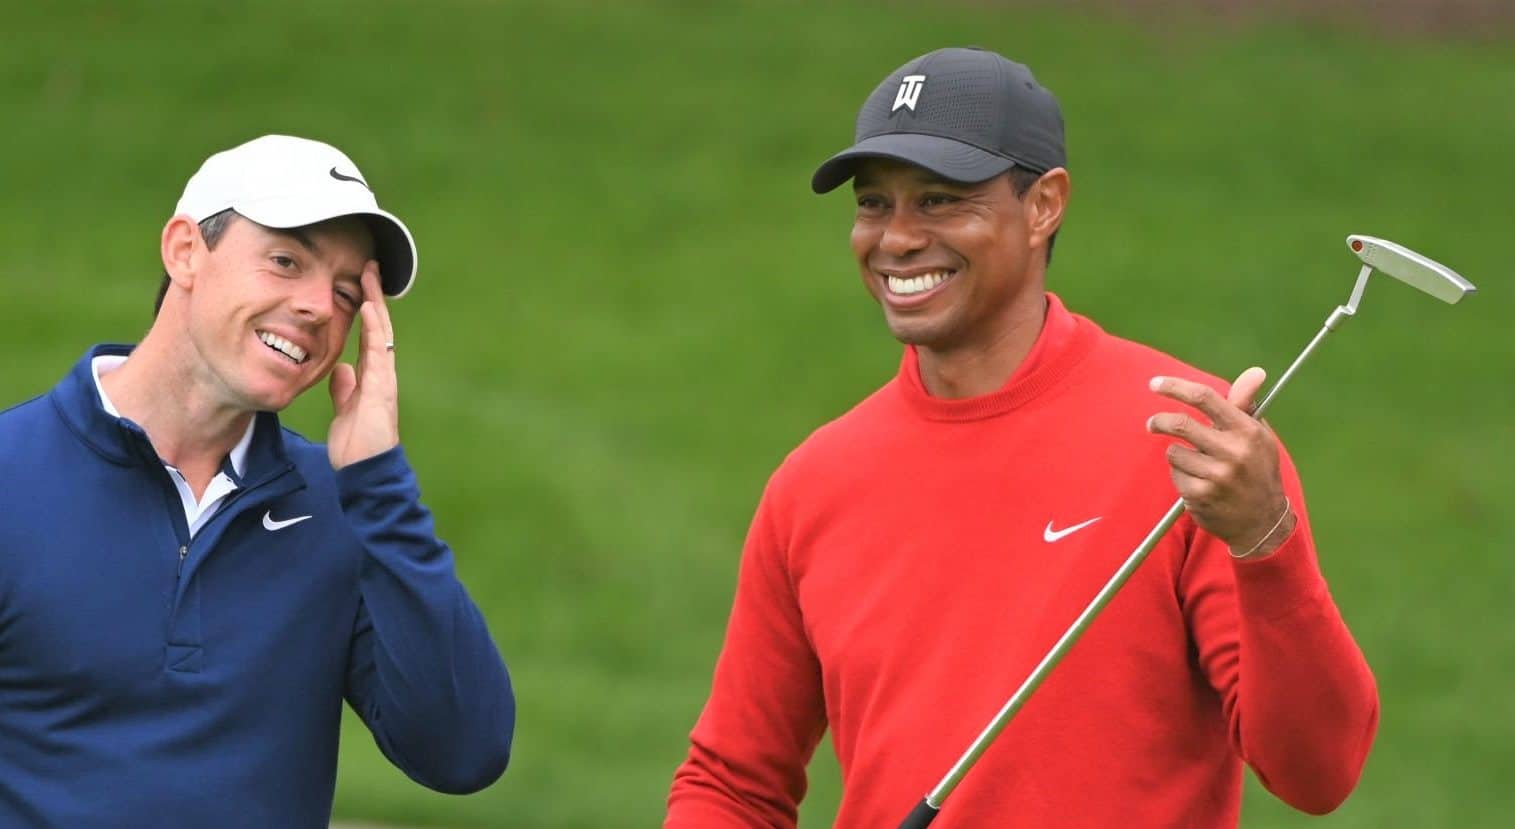 You are currently viewing Spieth, McIlroy ready for Tiger supergroup frenzy